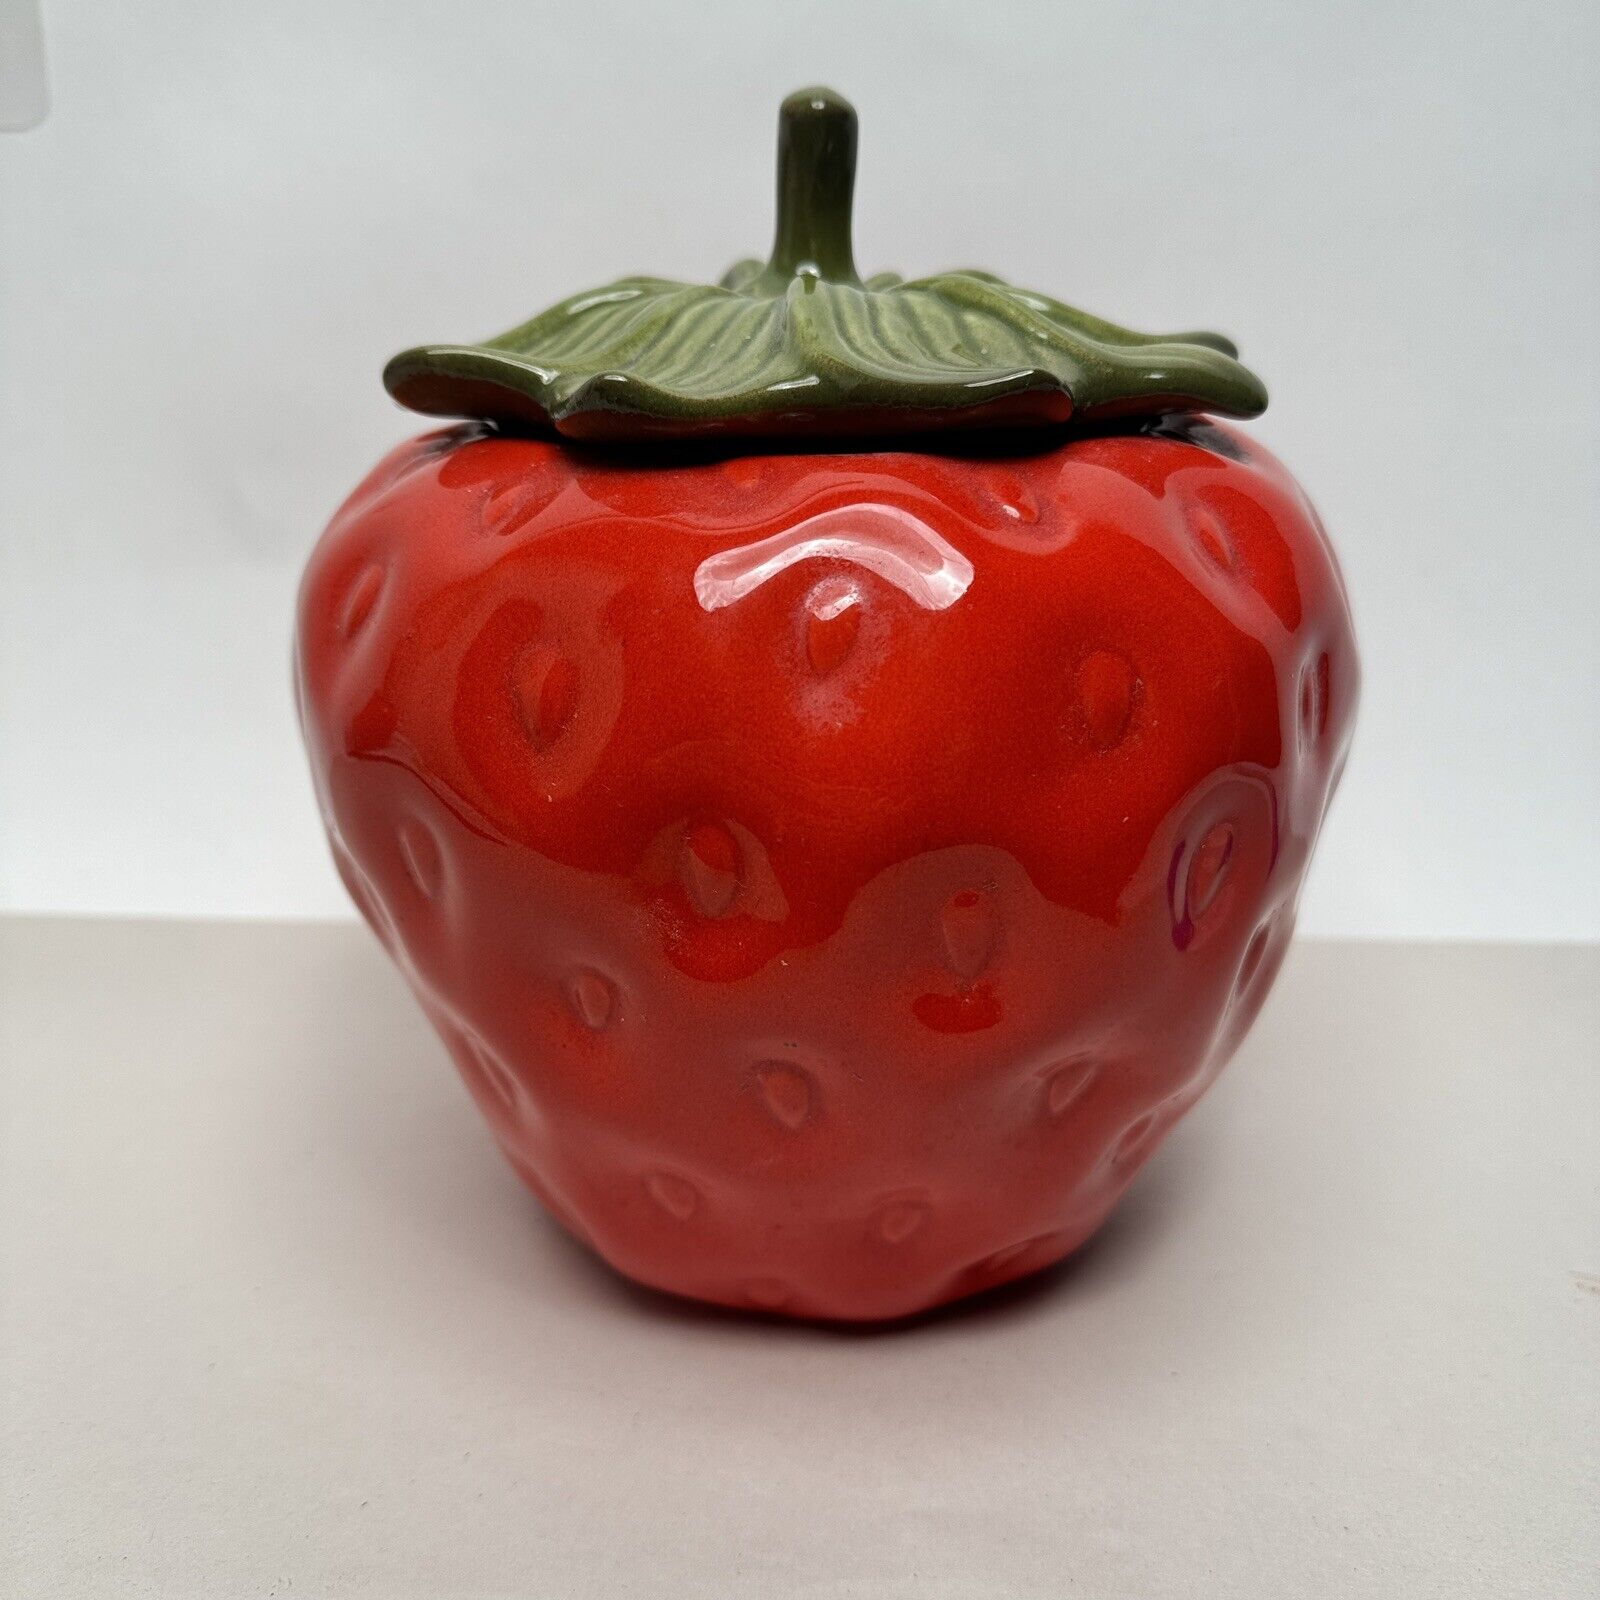 7” Vintage Ceramic Strawberry Shaped Cookie Jar Canister Made in USA